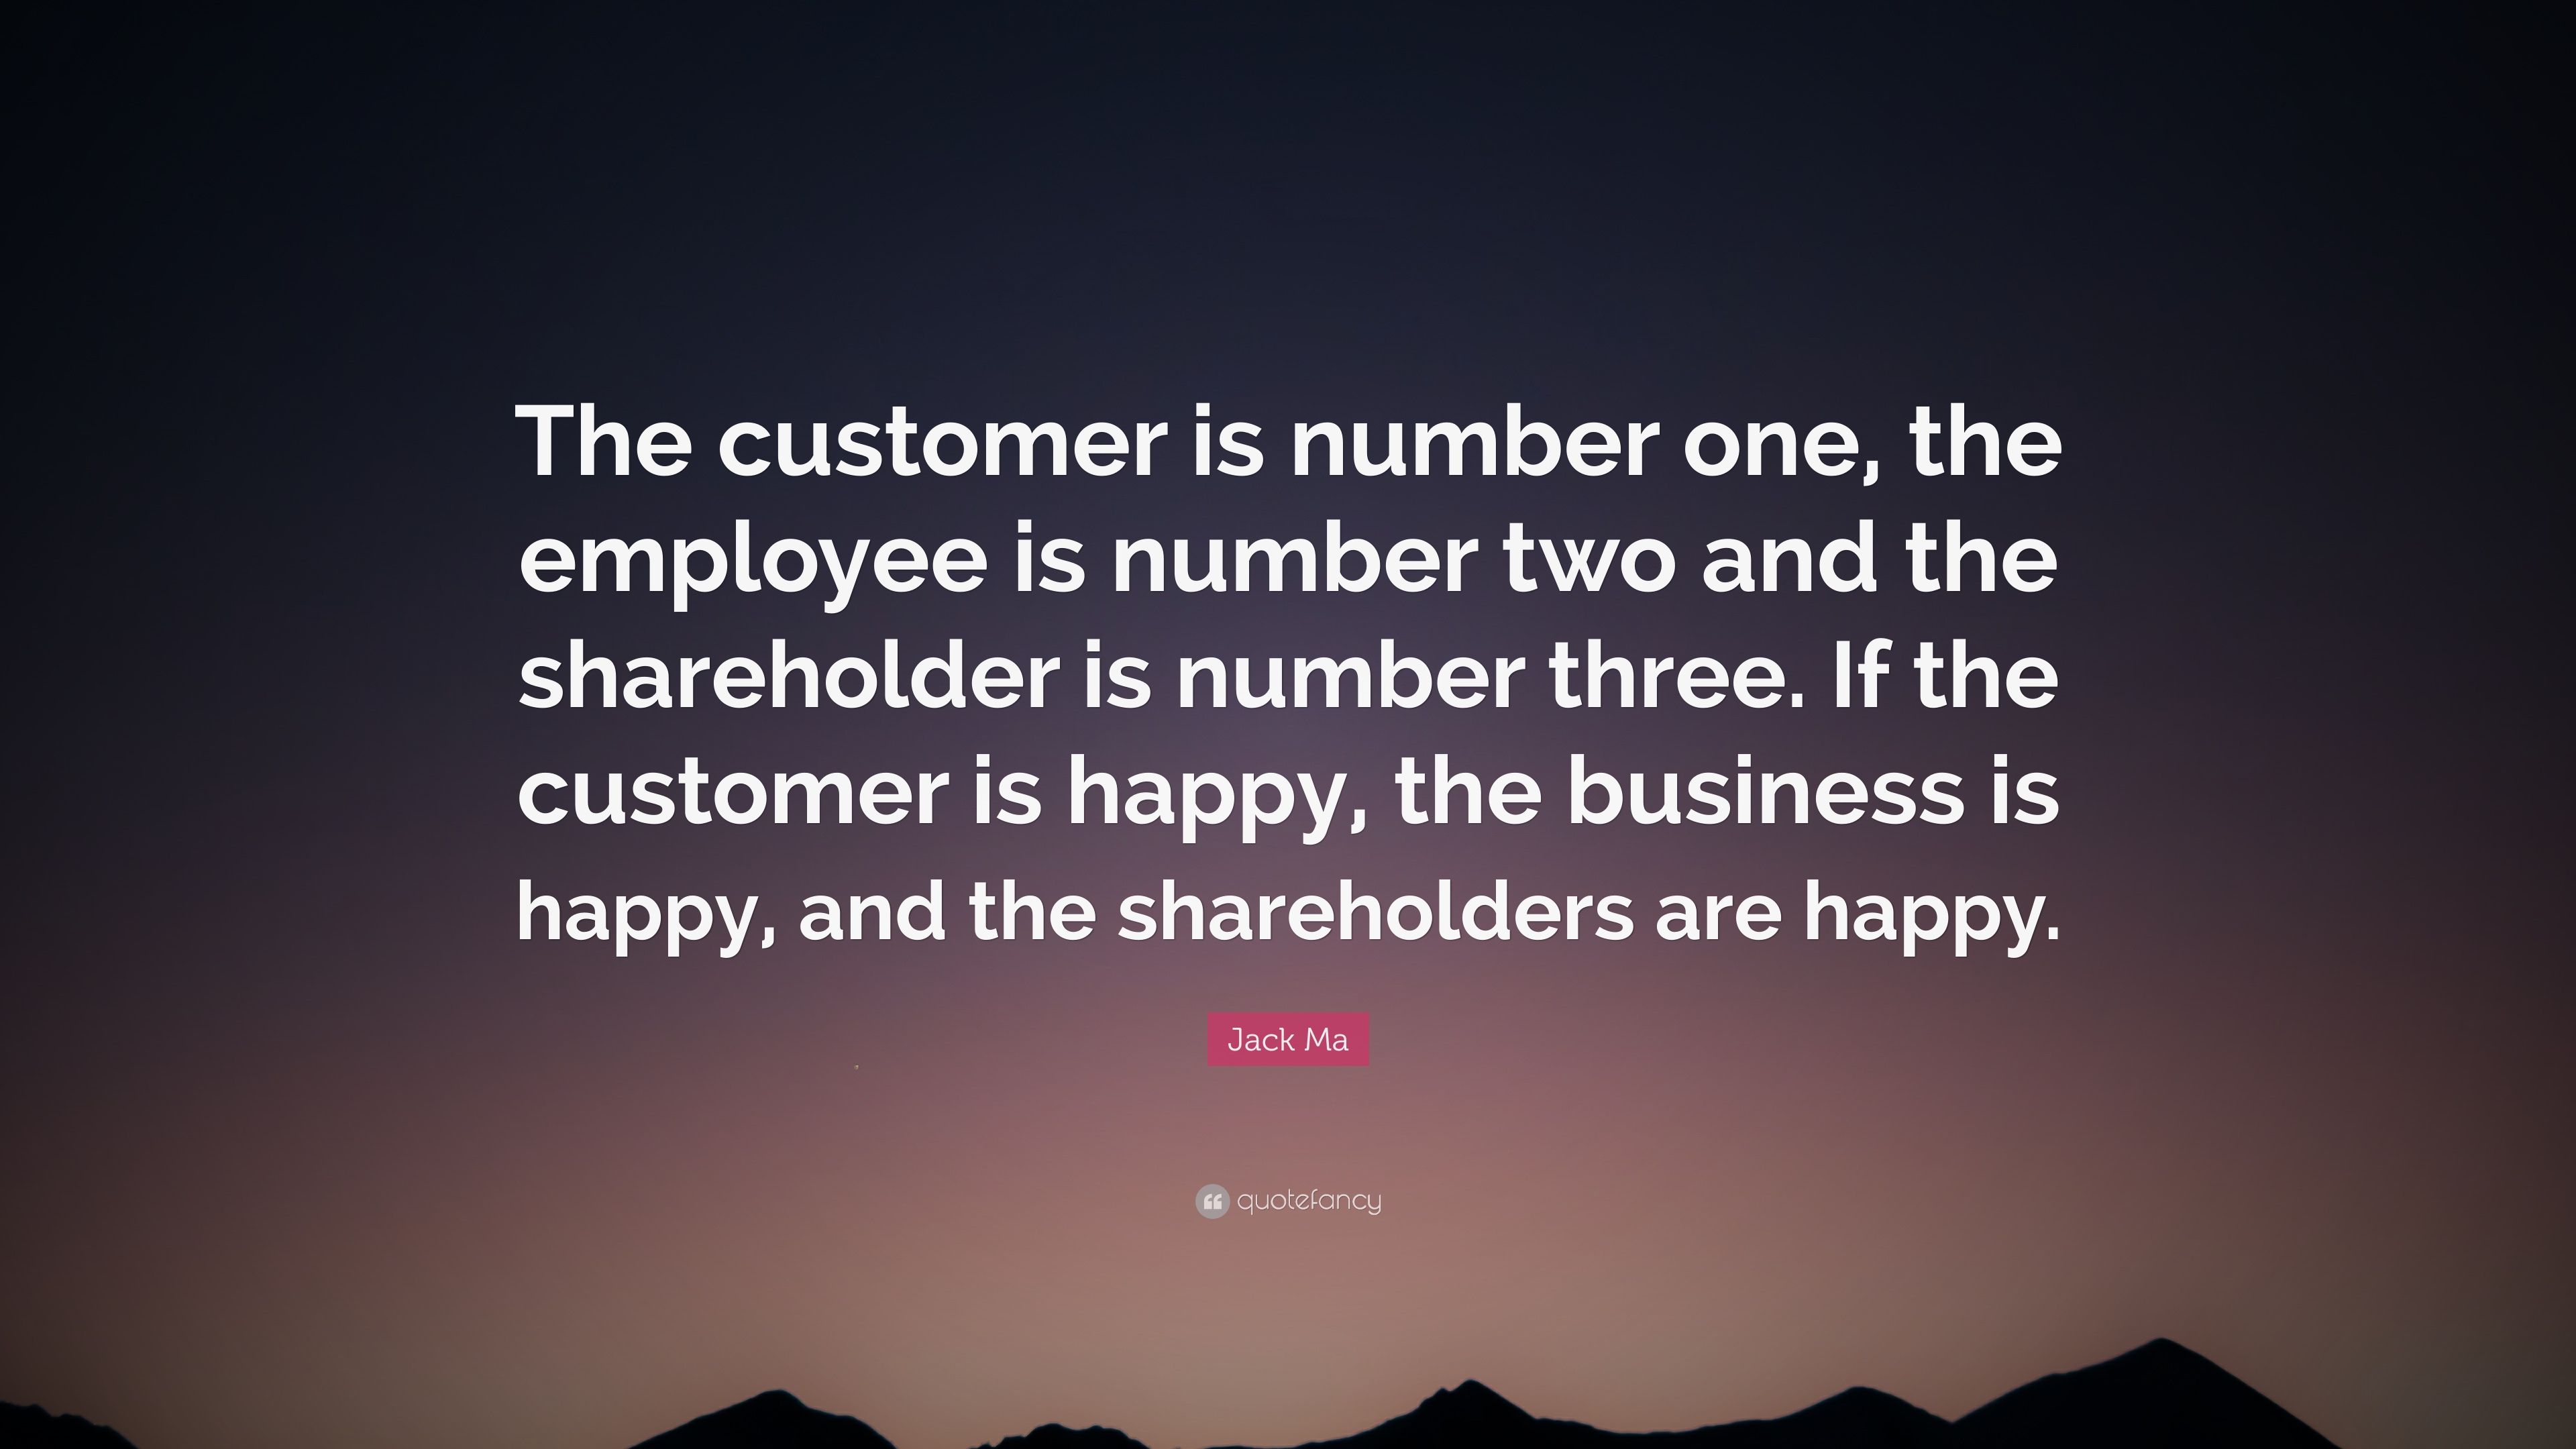 Jack Ma Quote: “The customer is number one, the employee is number